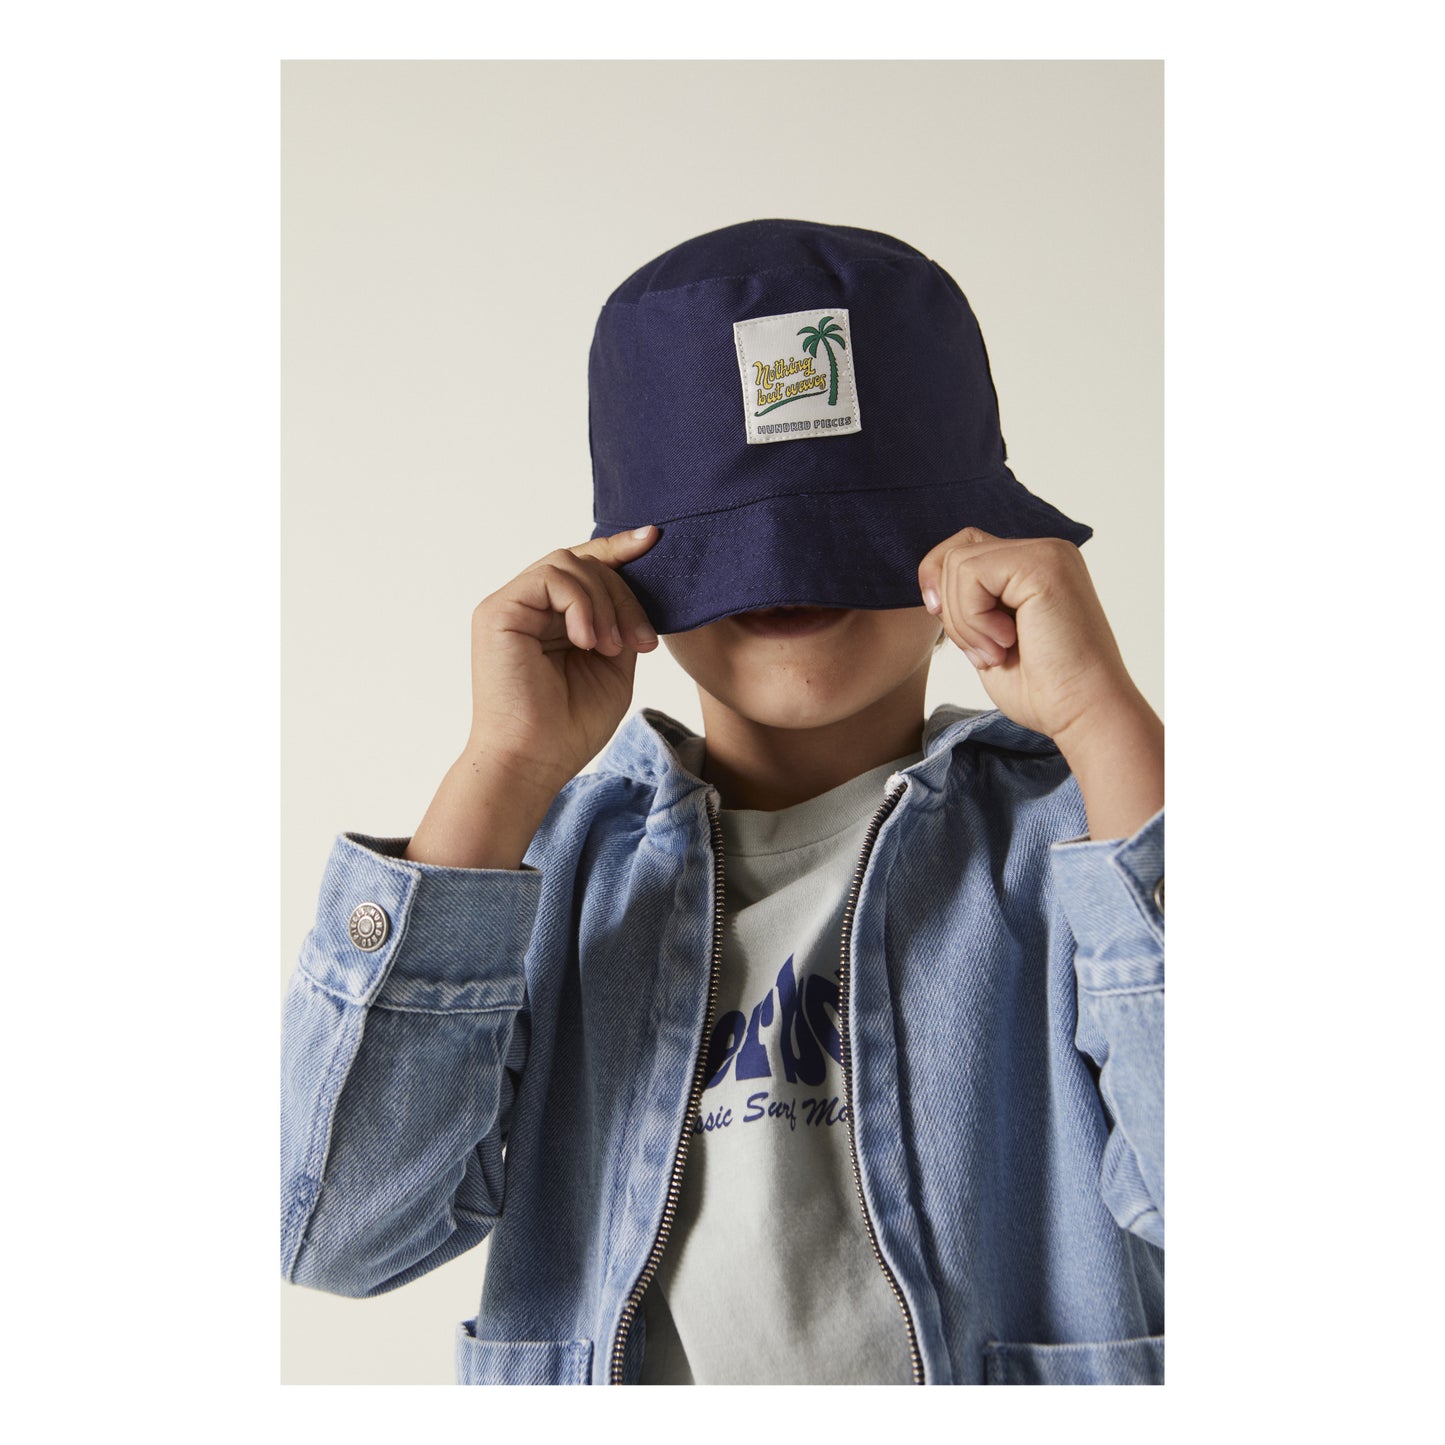 Hundred Pieces Navy Bucket Hat